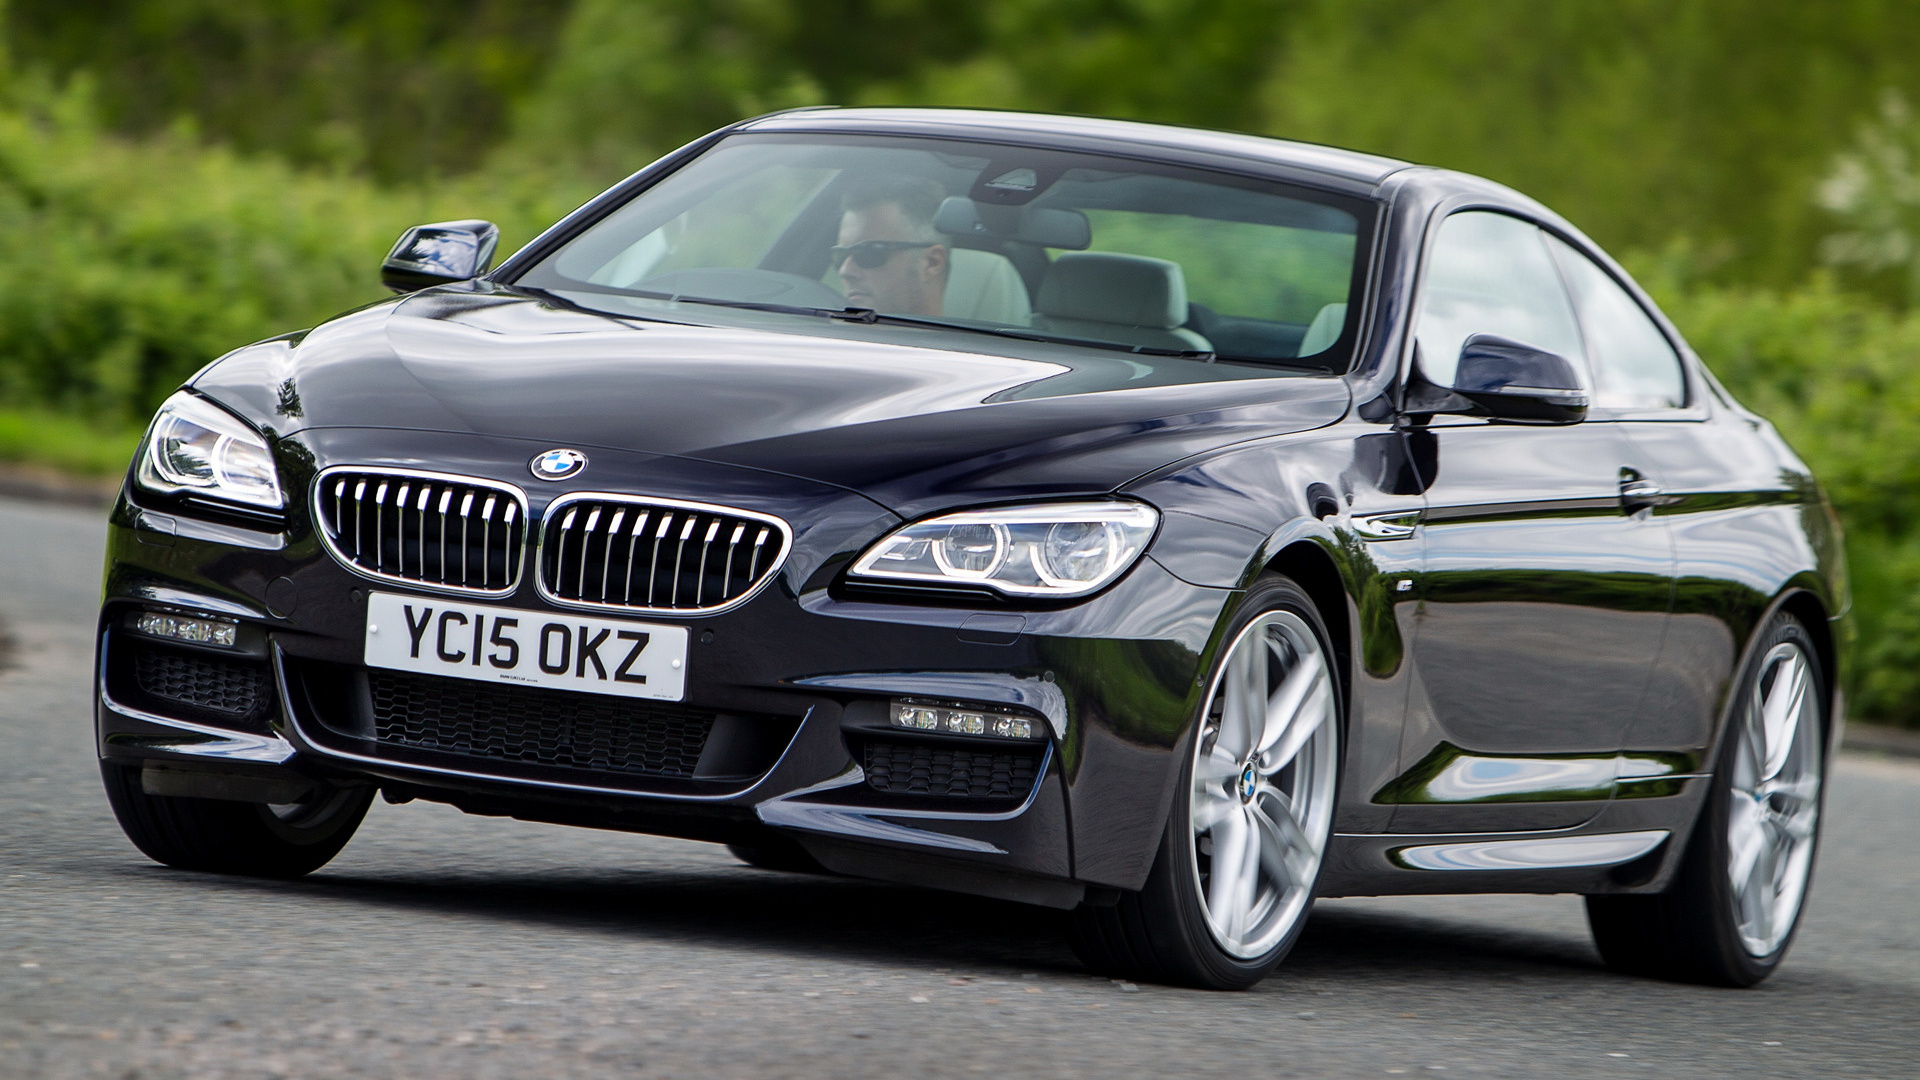 2015 BMW 6 Series Coupe M Sport (UK) Wallpapers and HD